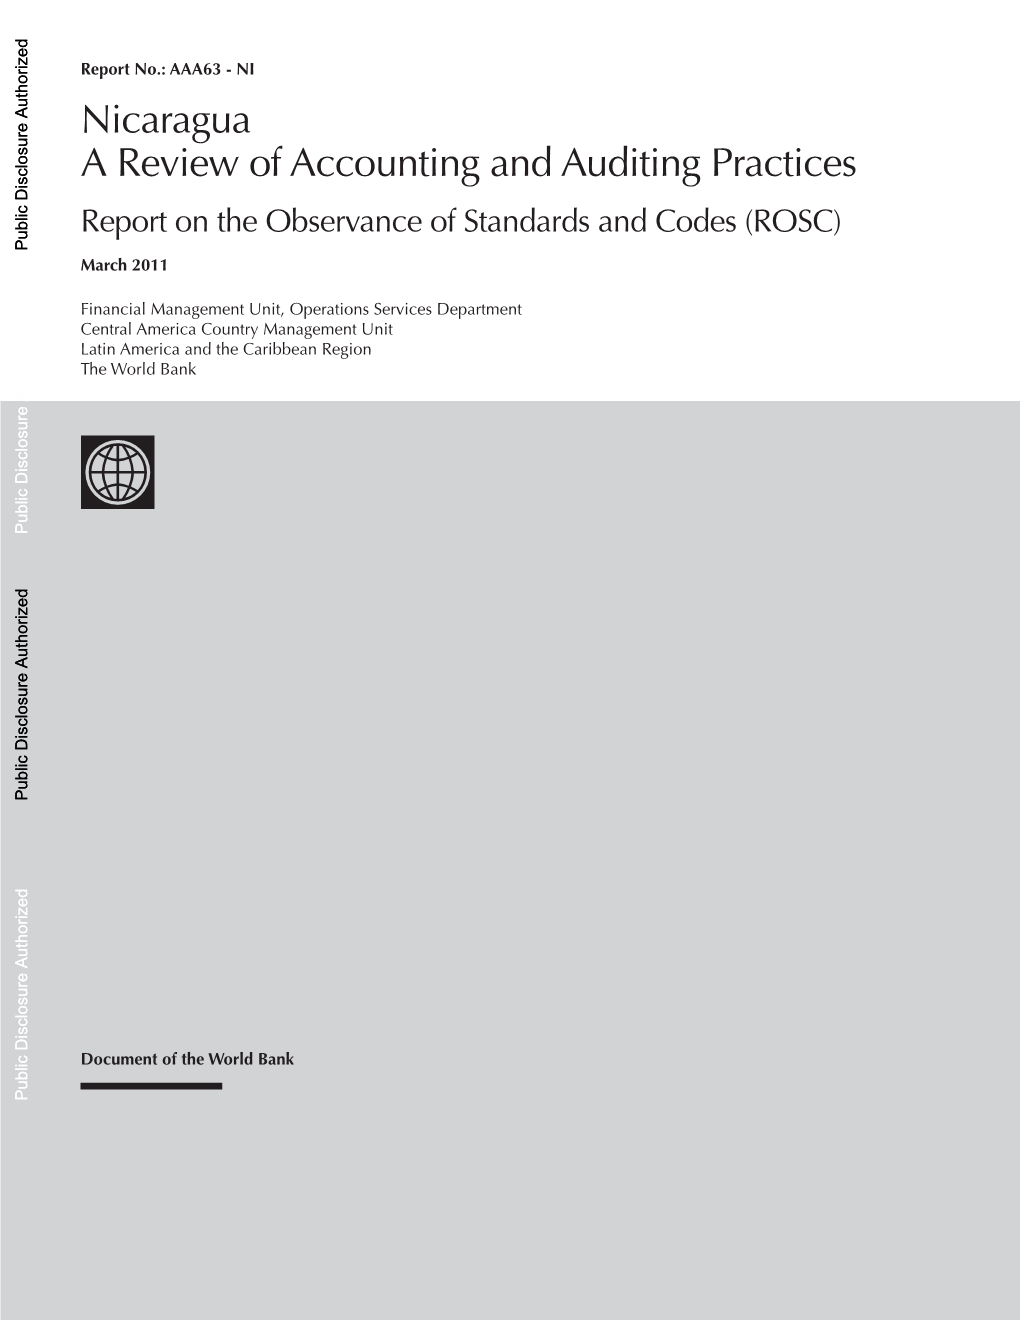 Nicaragua a Review of Accounting and Auditing Practices Report on the Observance of Standards and Codes (ROSC) Public Disclosure Authorized March 2011